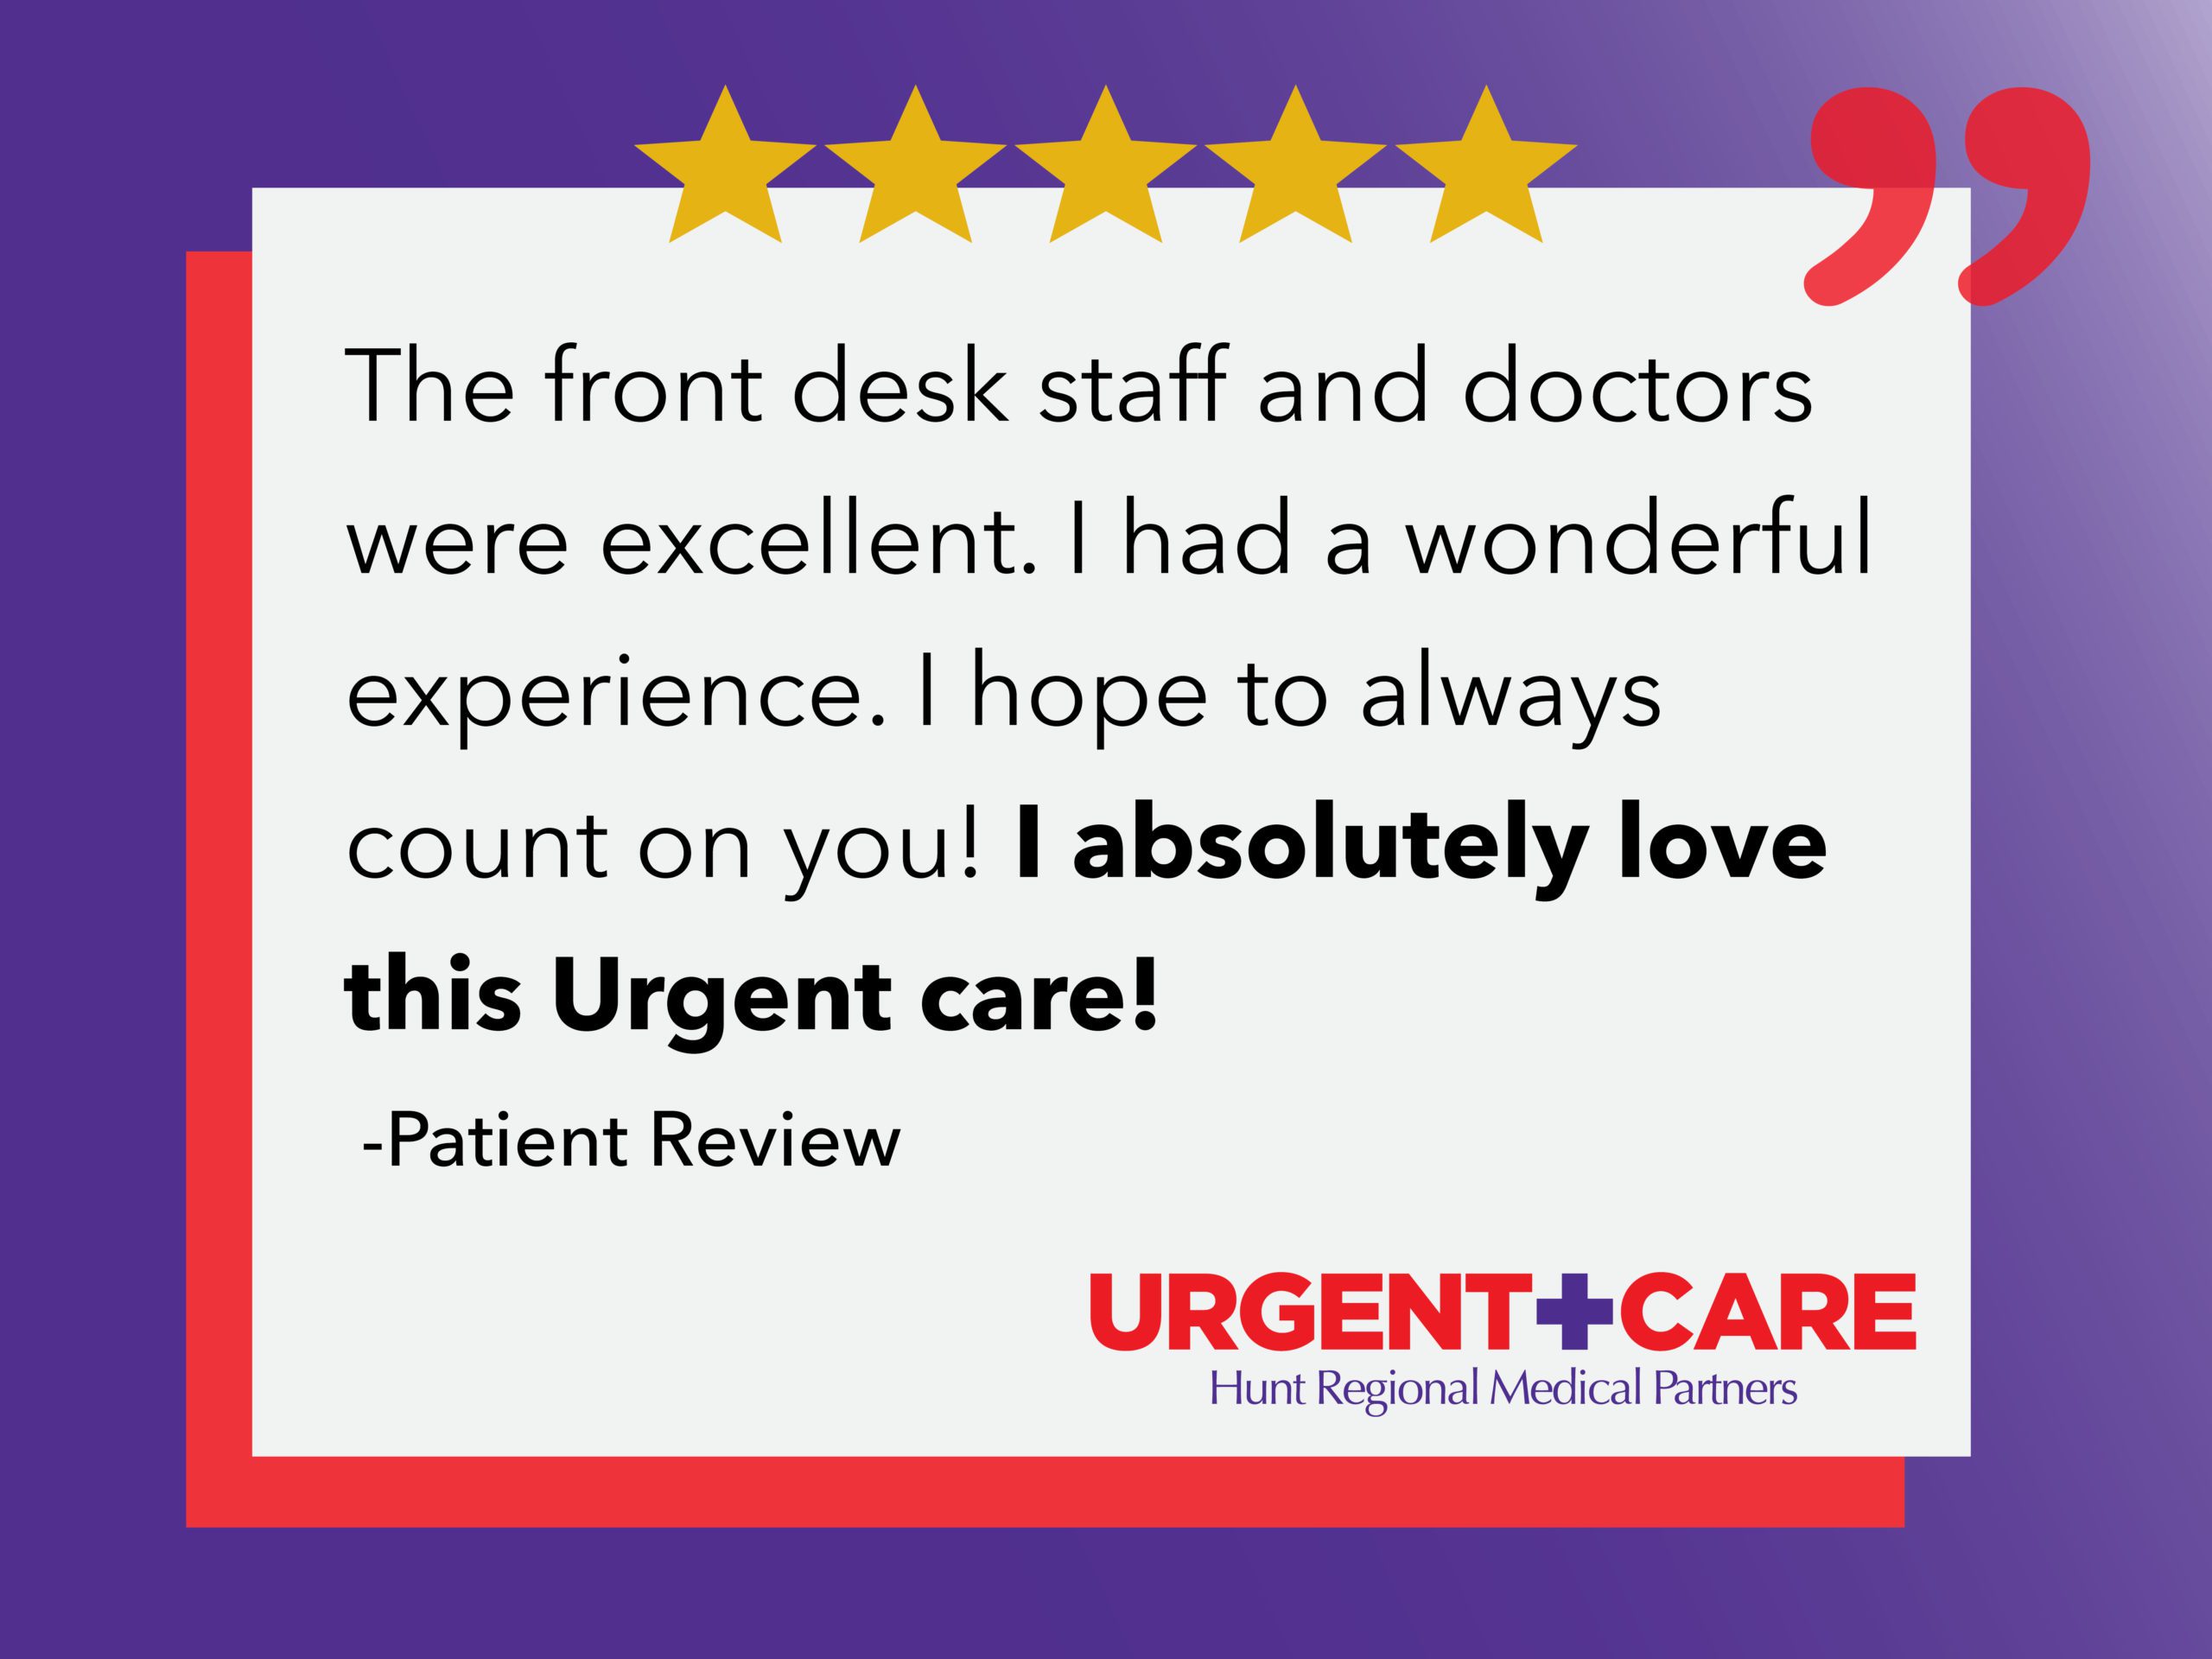 The front desk staff and doctors were excellent. I had a wonderful experience. I hope to always count on you! I absolutely love this Urgent care! | -Patient Review | Urgent Care | Hunt Regional Medical Partners